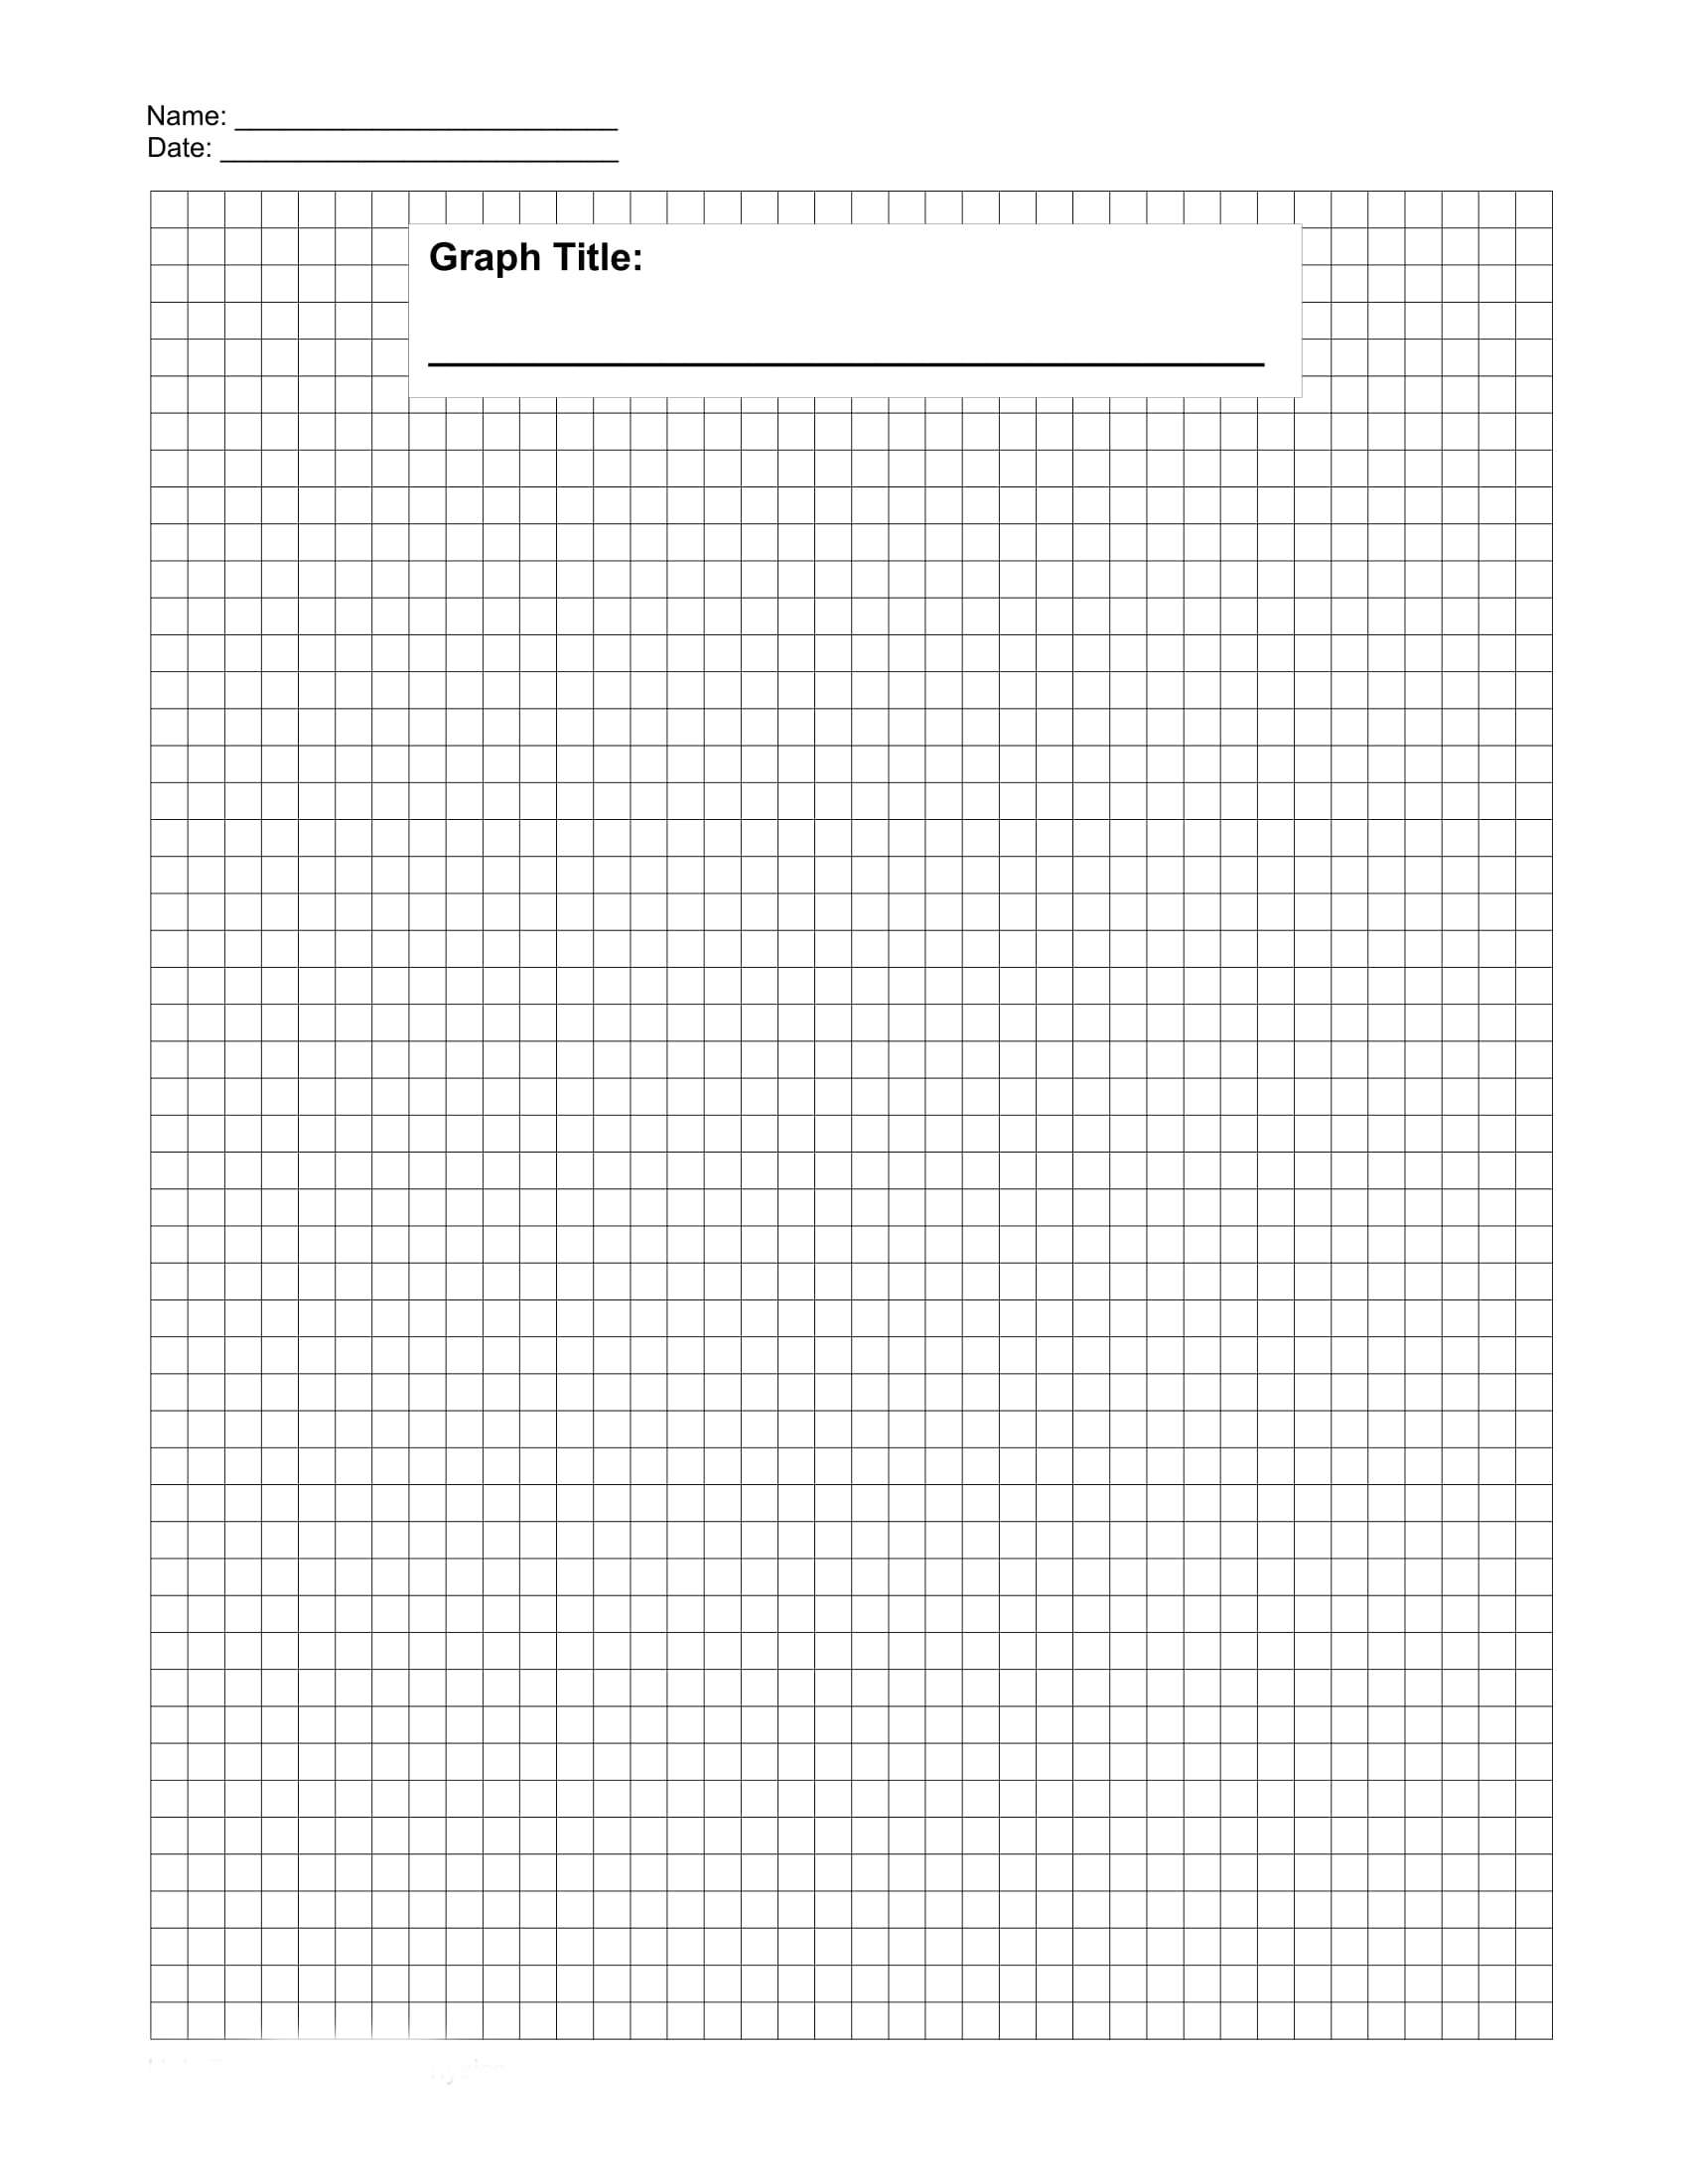 30+ Free Printable Graph Paper Templates (Word, Pdf) ᐅ Template Lab inside Free Blank Templates To Print